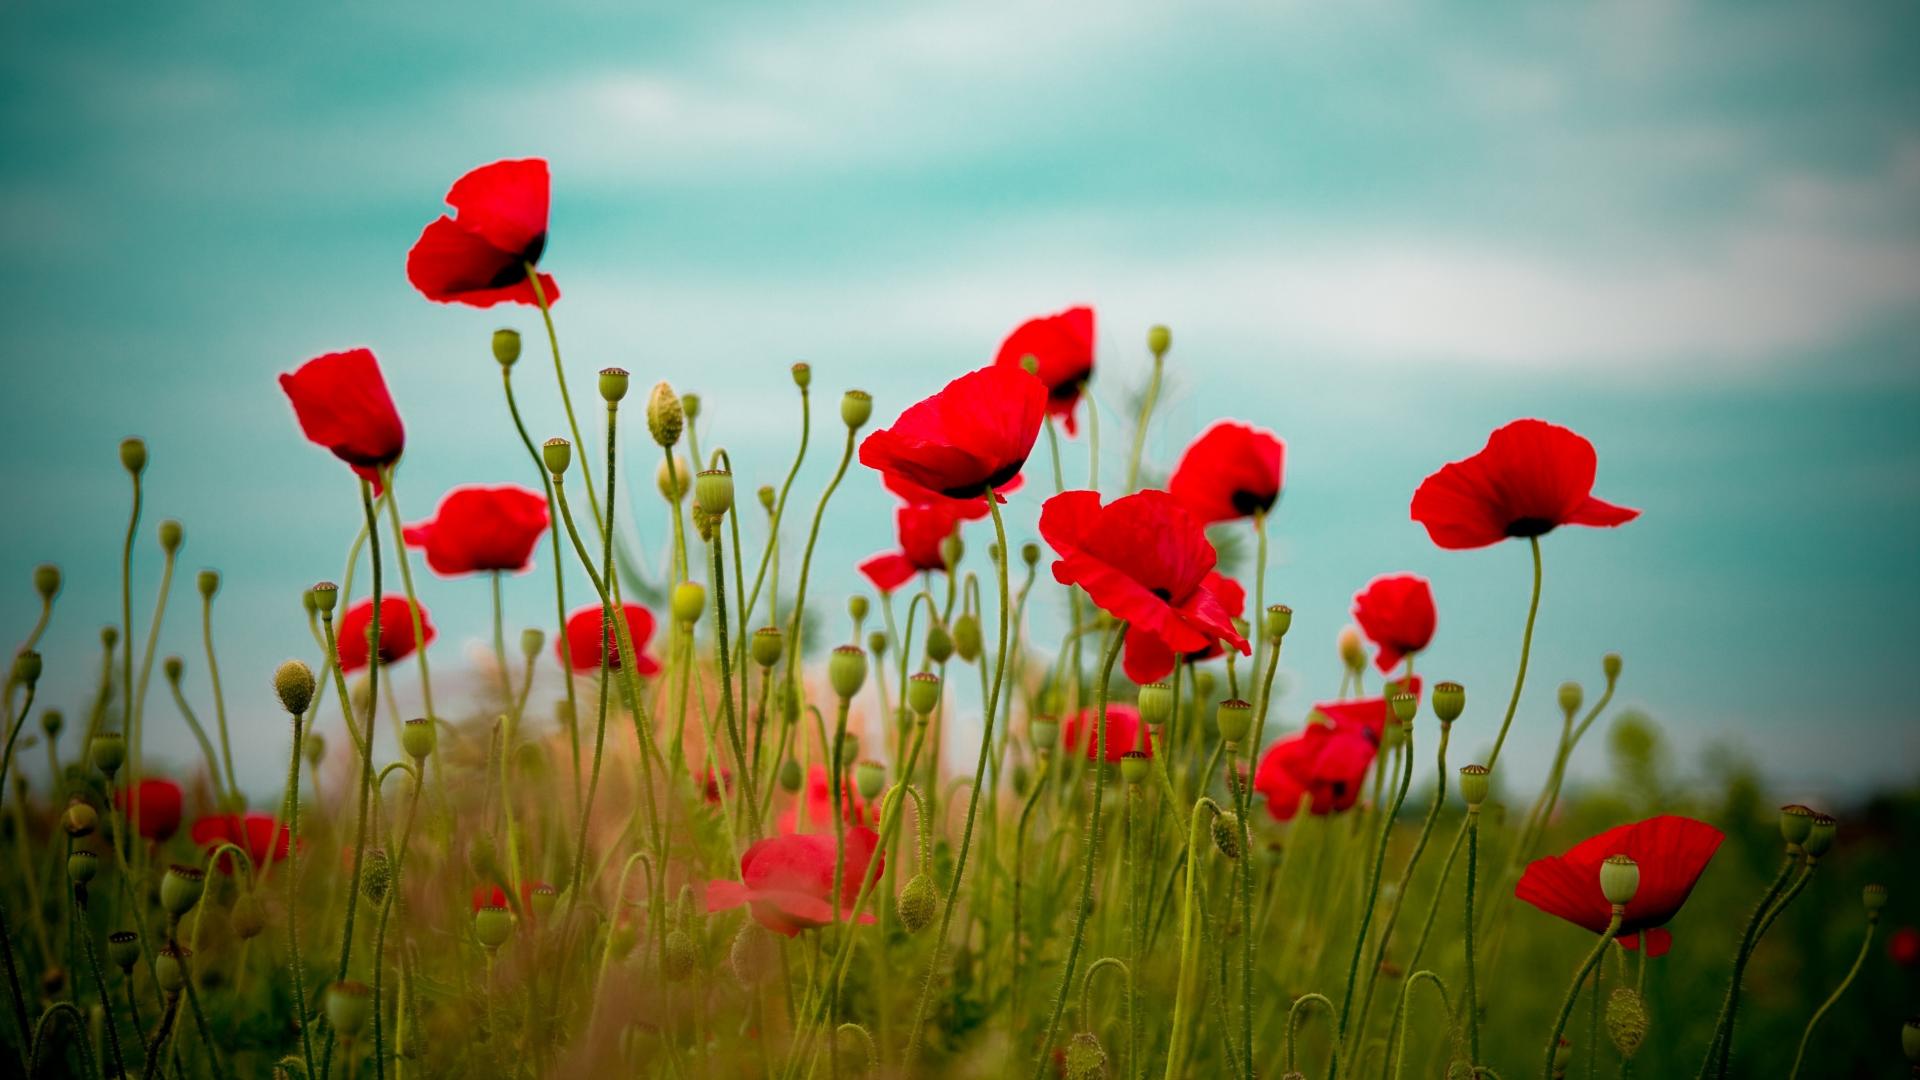 🥇 Nature flowers red poppies wallpaper | (25138)